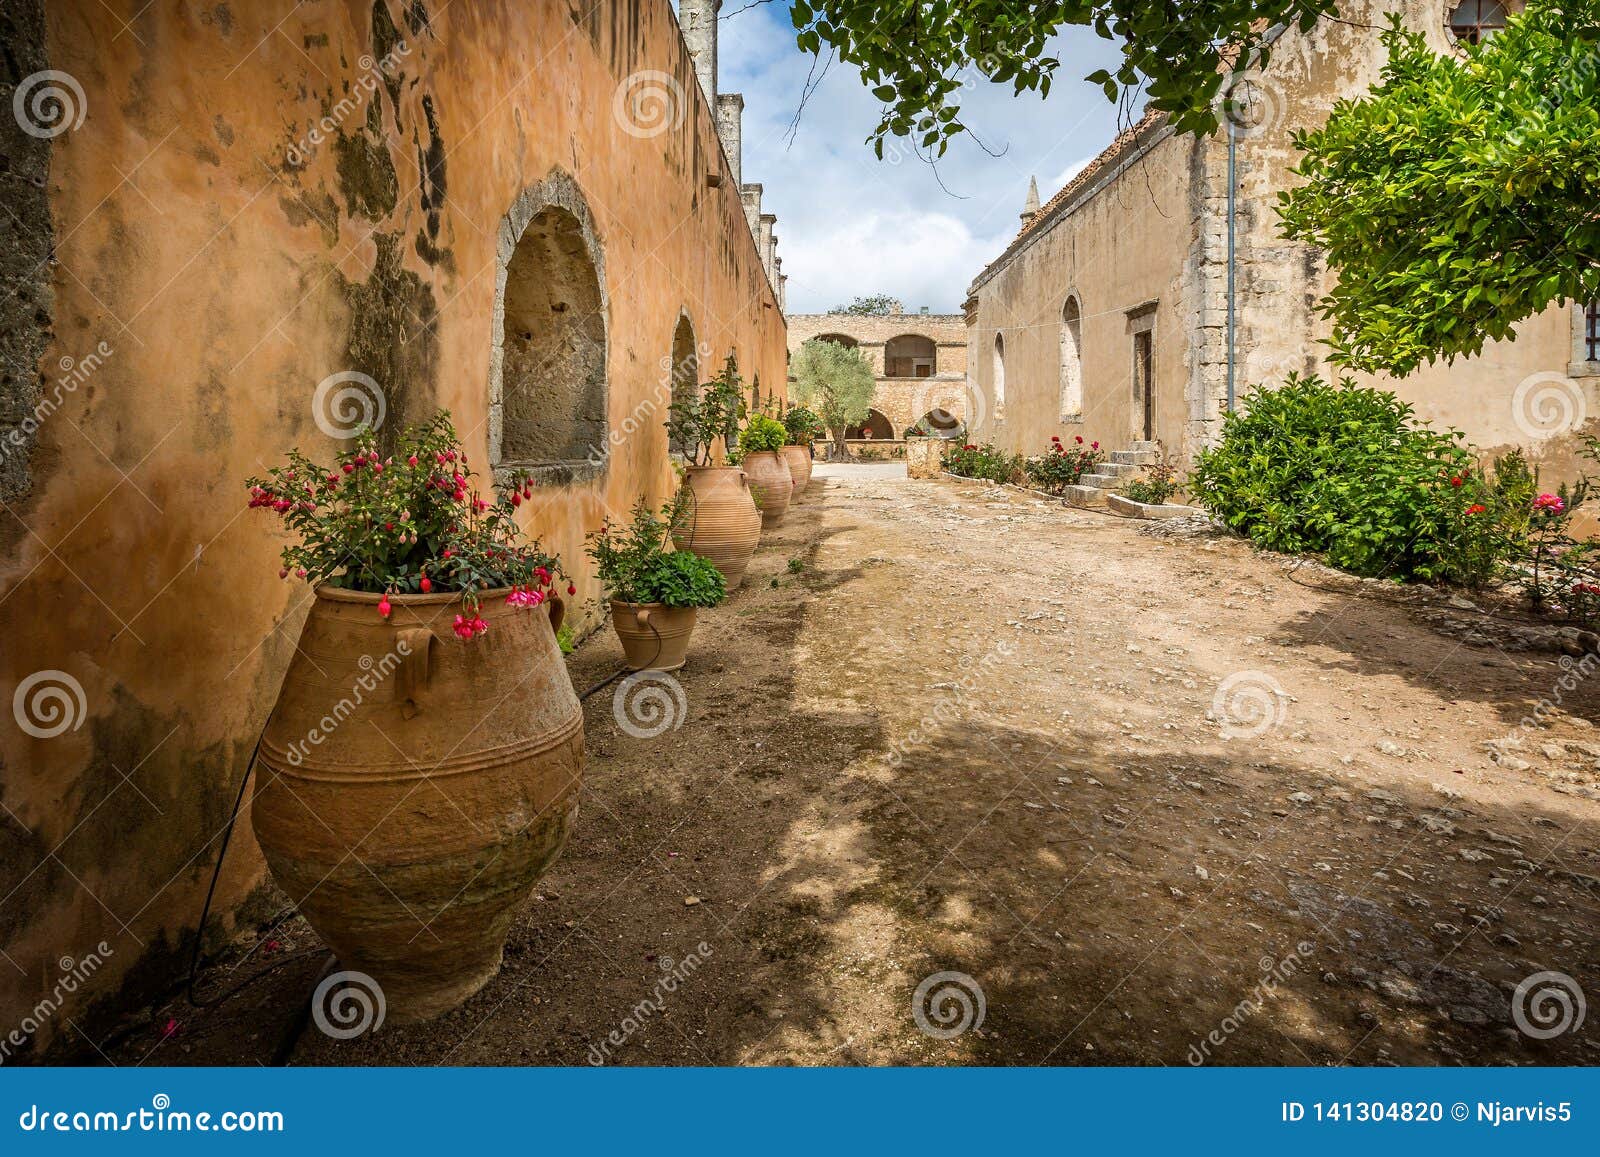 Courtyard of the Arkadi Monastery with Large Flower Pots in Crete